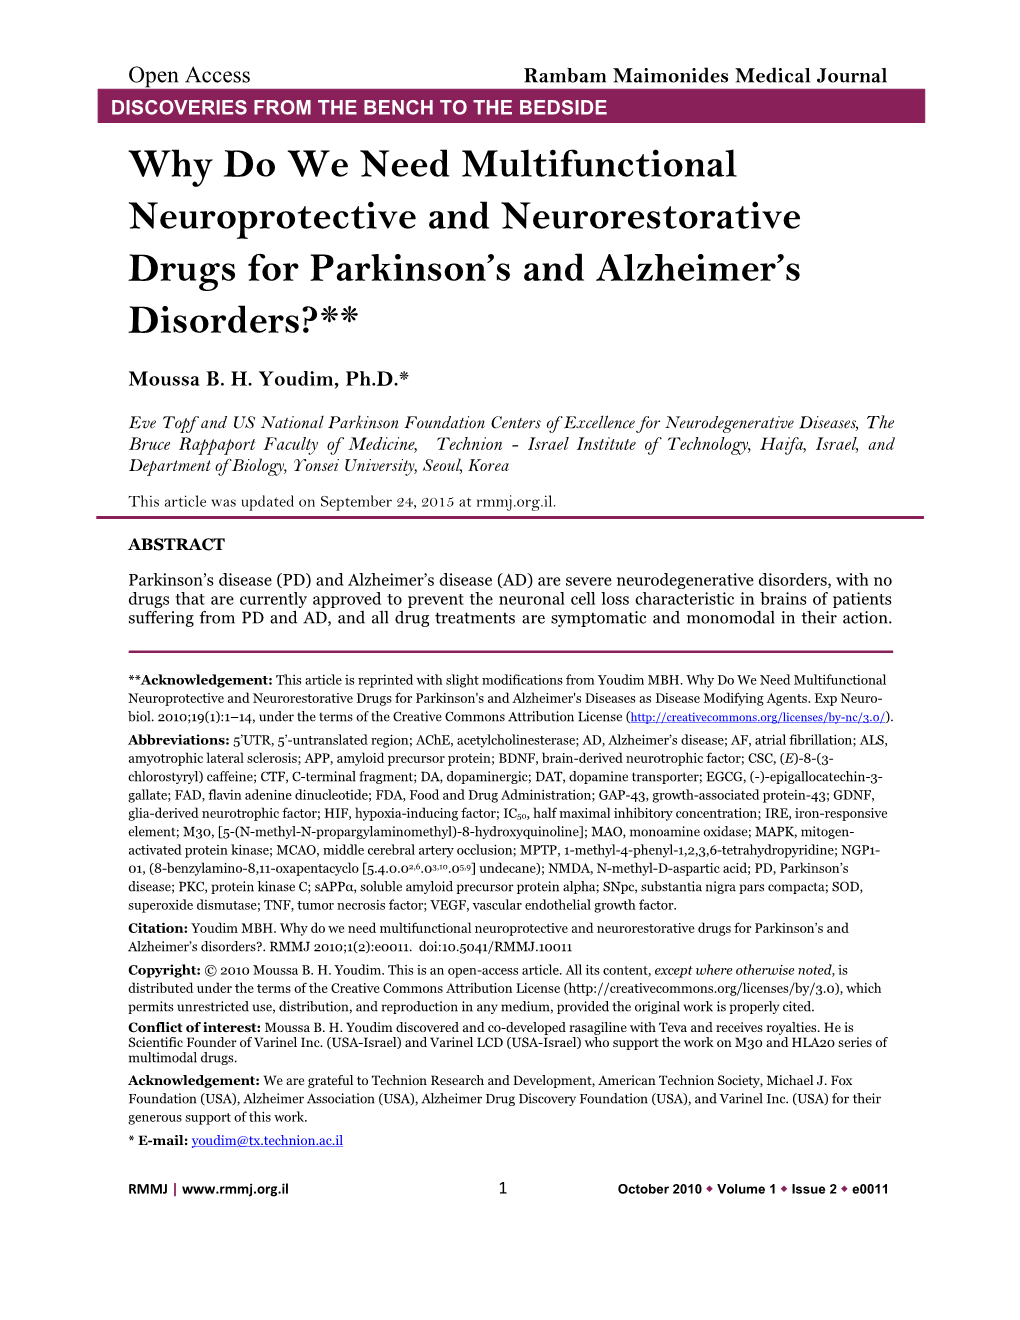 Why Do We Need Multifunctional Neuroprotective and Neurorestorative Drugs for Parkinson’S and Alzheimer’S Disorders?**